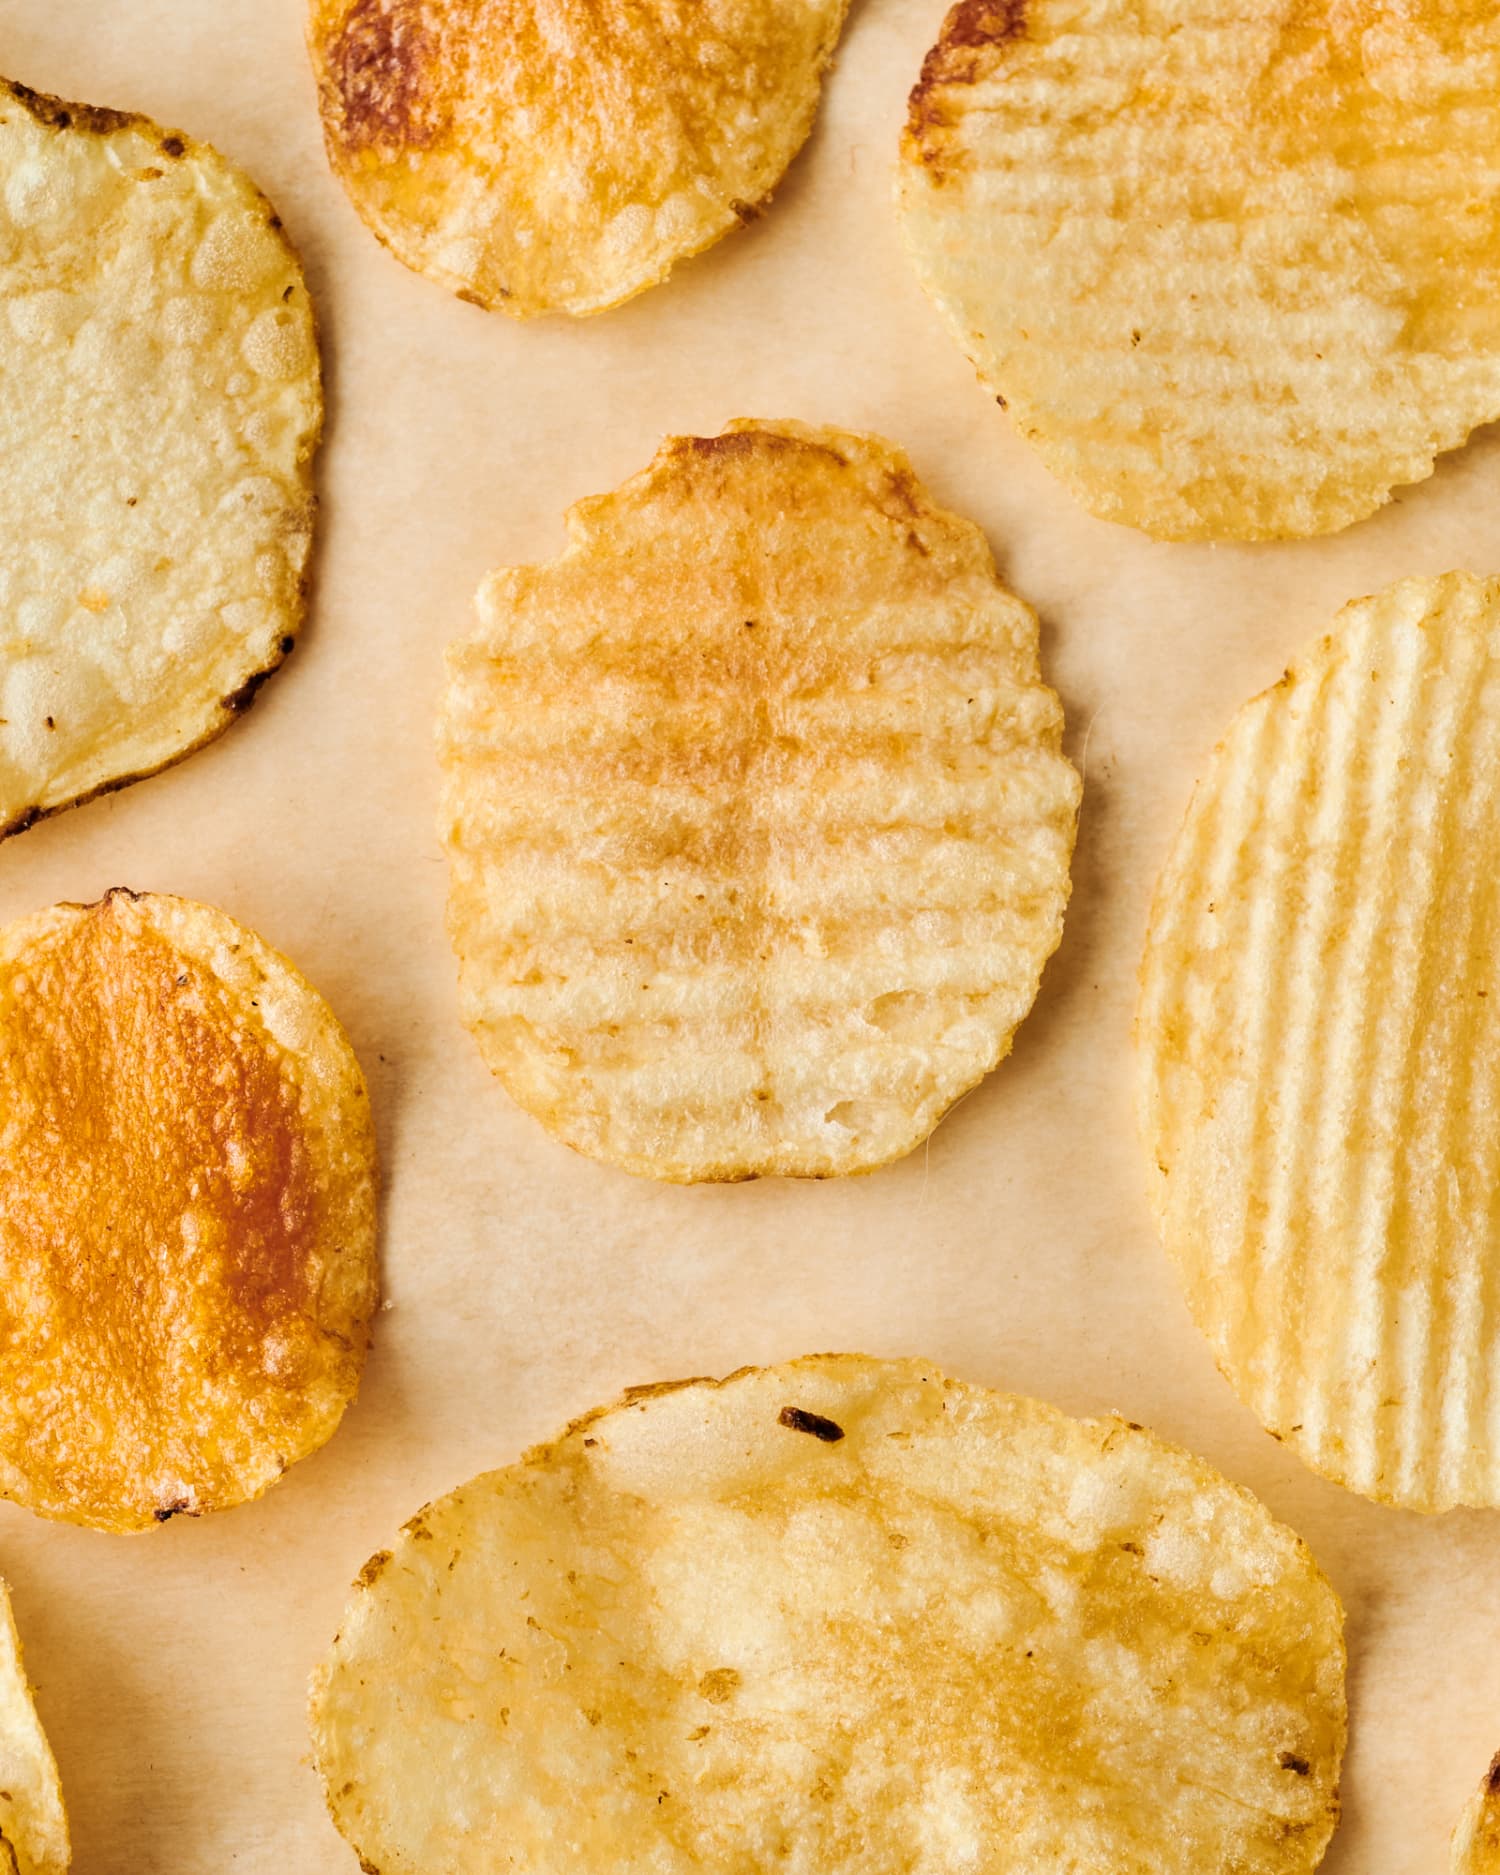 Leave It to the Irish to Make the Best (and Wittiest!) Potato Chips